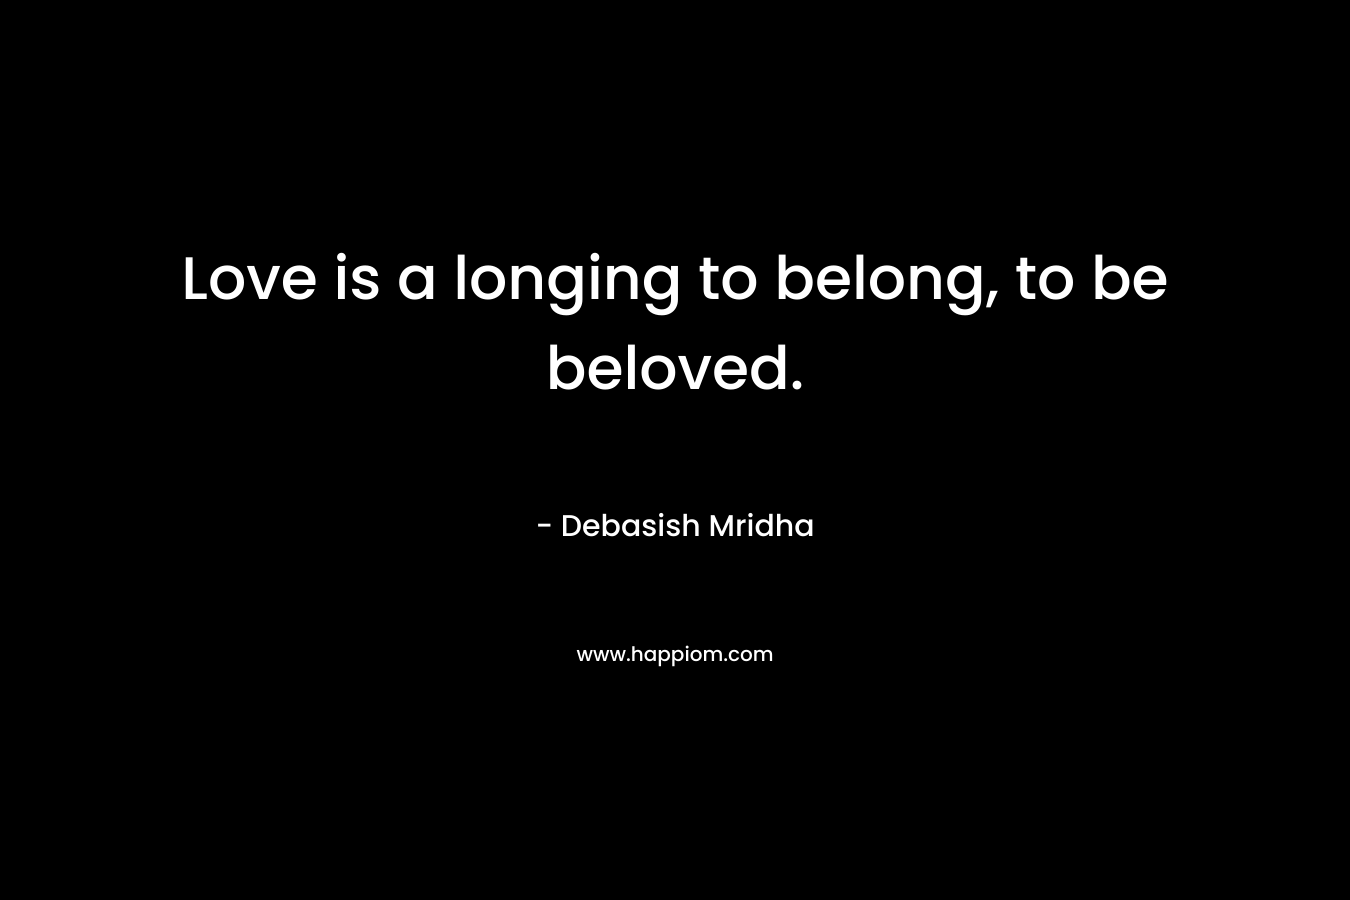 Love is a longing to belong, to be beloved.